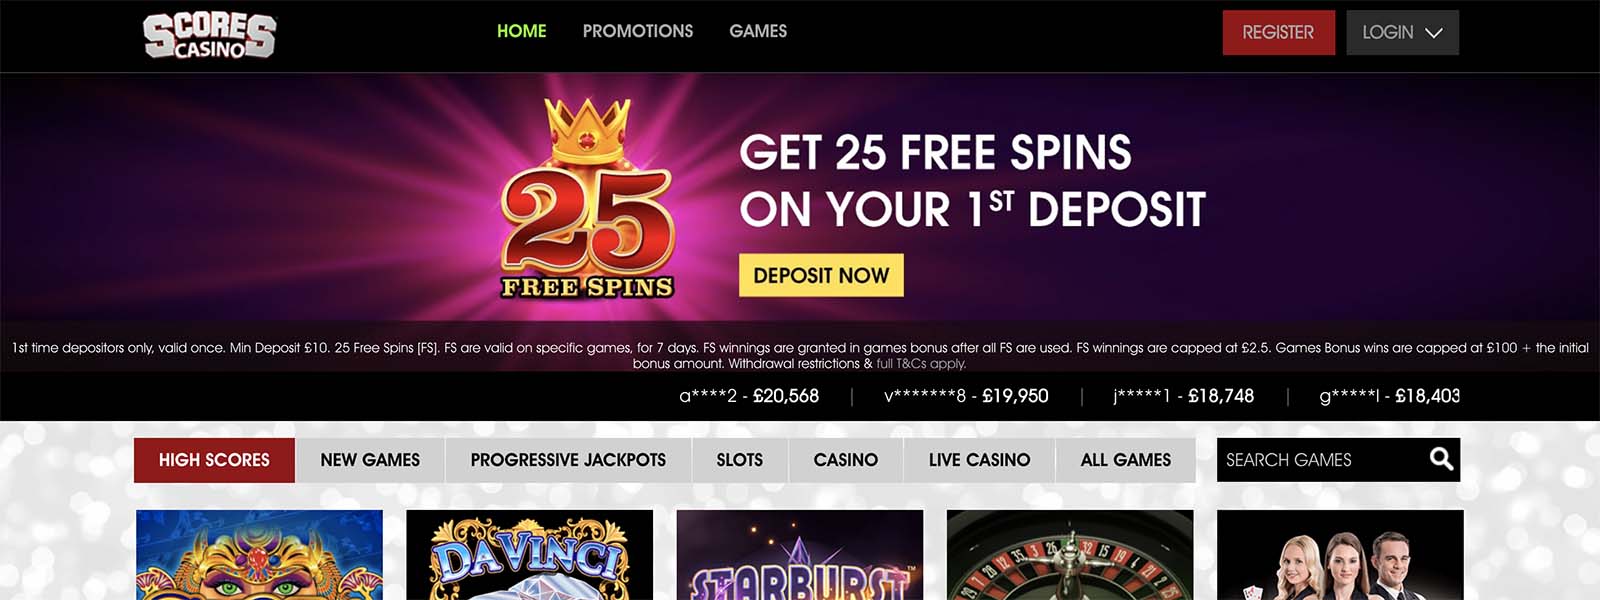 Scores Casino download the new version for android